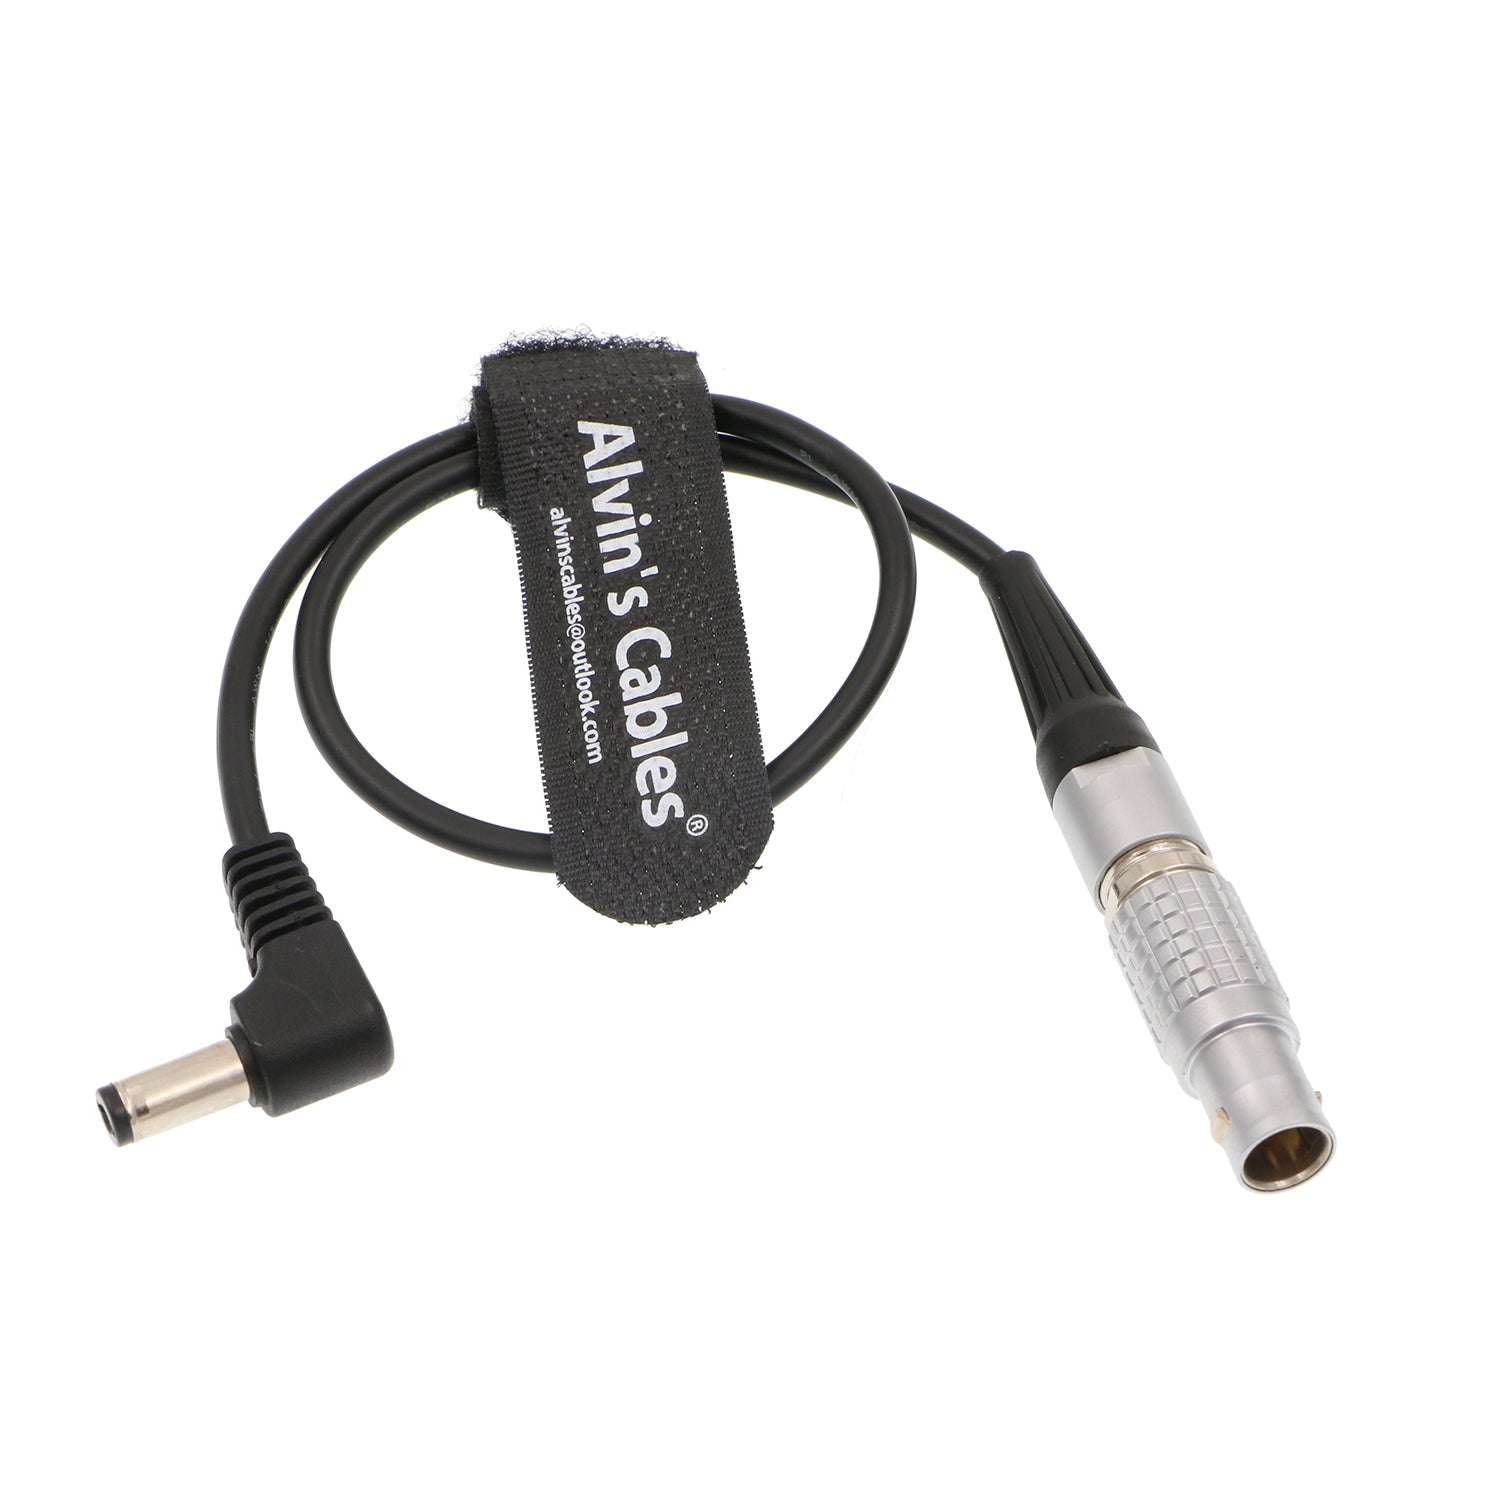 Alvin's Cables Power Cable for Feelworld FW279 FW279S Monitor from 3 P